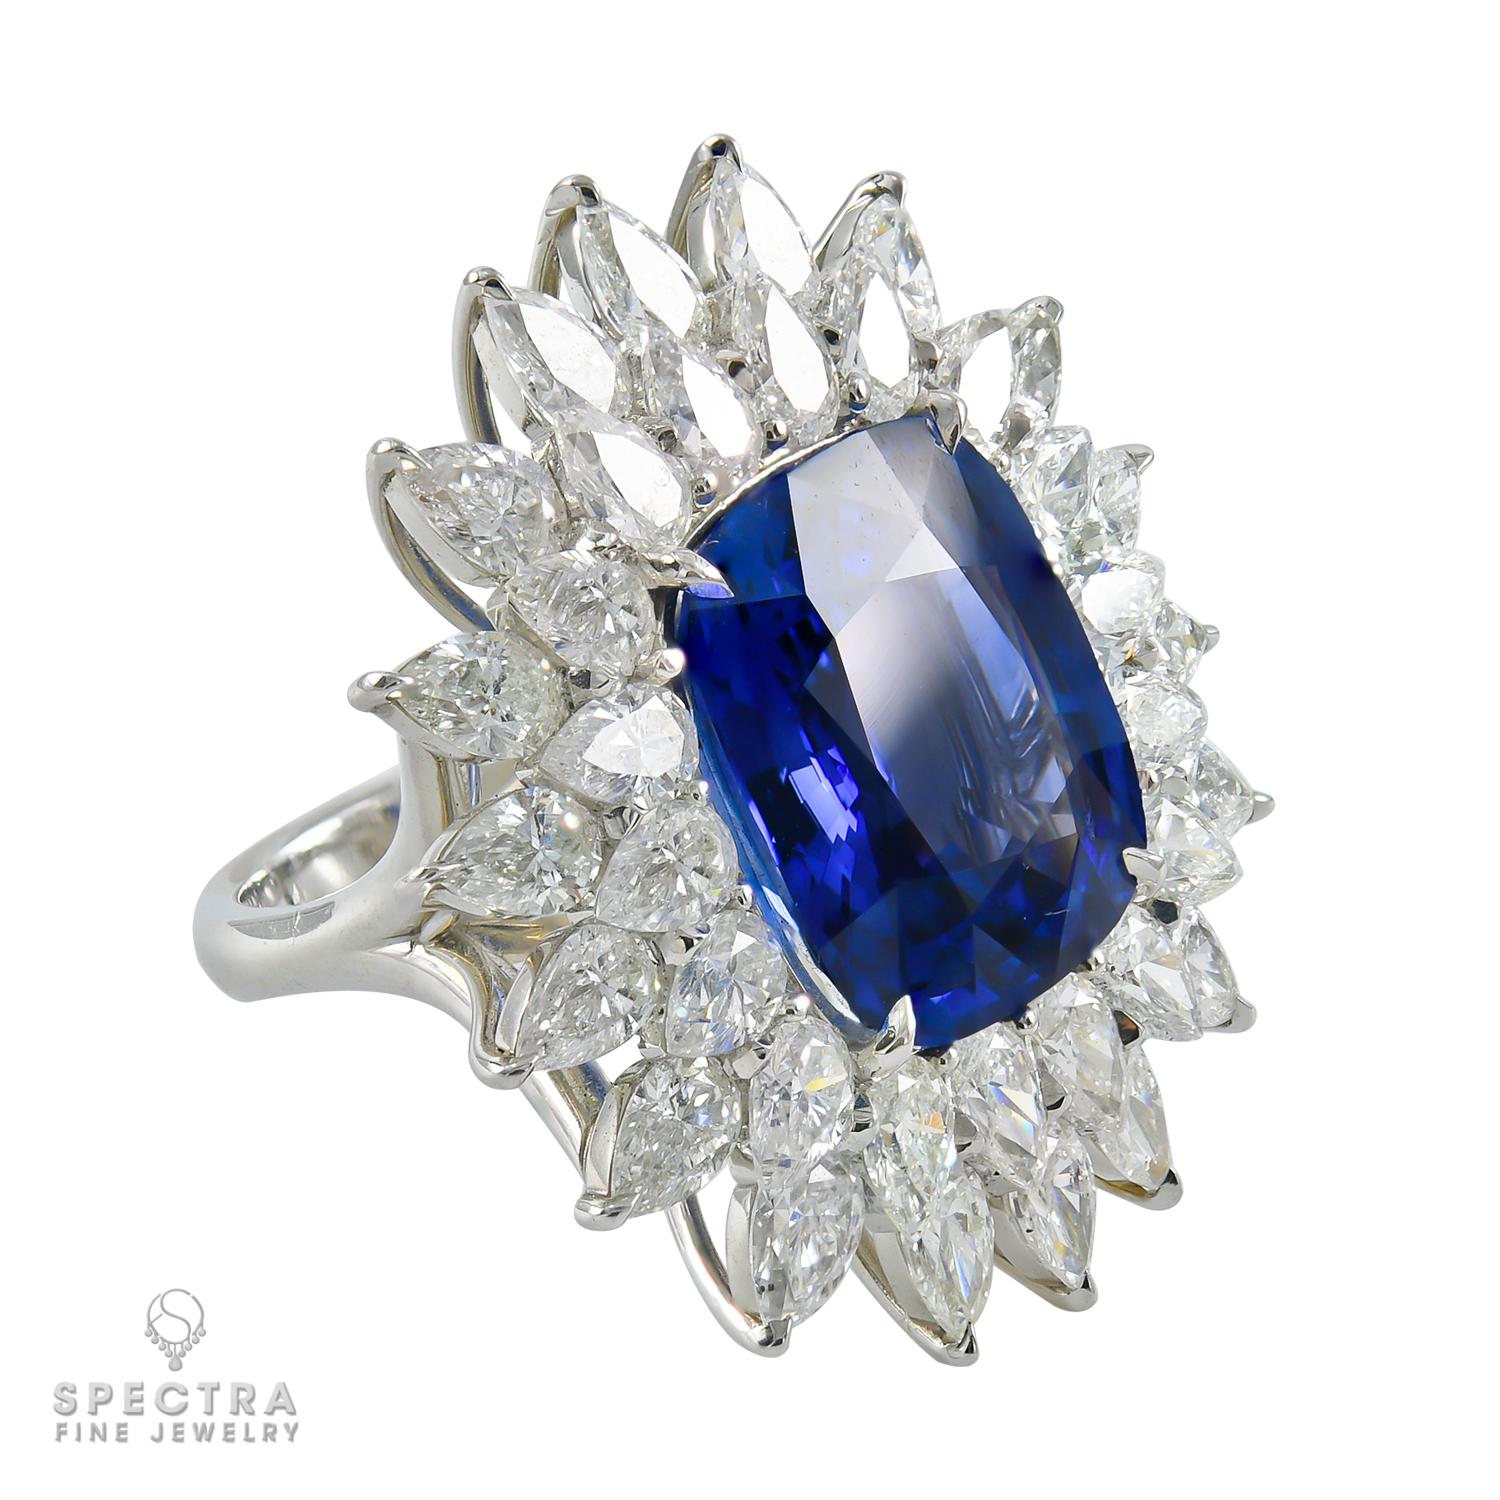 A gorgeous cocktail ring embellished with a 15.67 carat cushion-shaped blue sapphire and diamonds.
The sapphire is accompanied by a report from C. Dunaigre lab, stating that it is of Ceylon origin with the indication of heating.  
The double halo